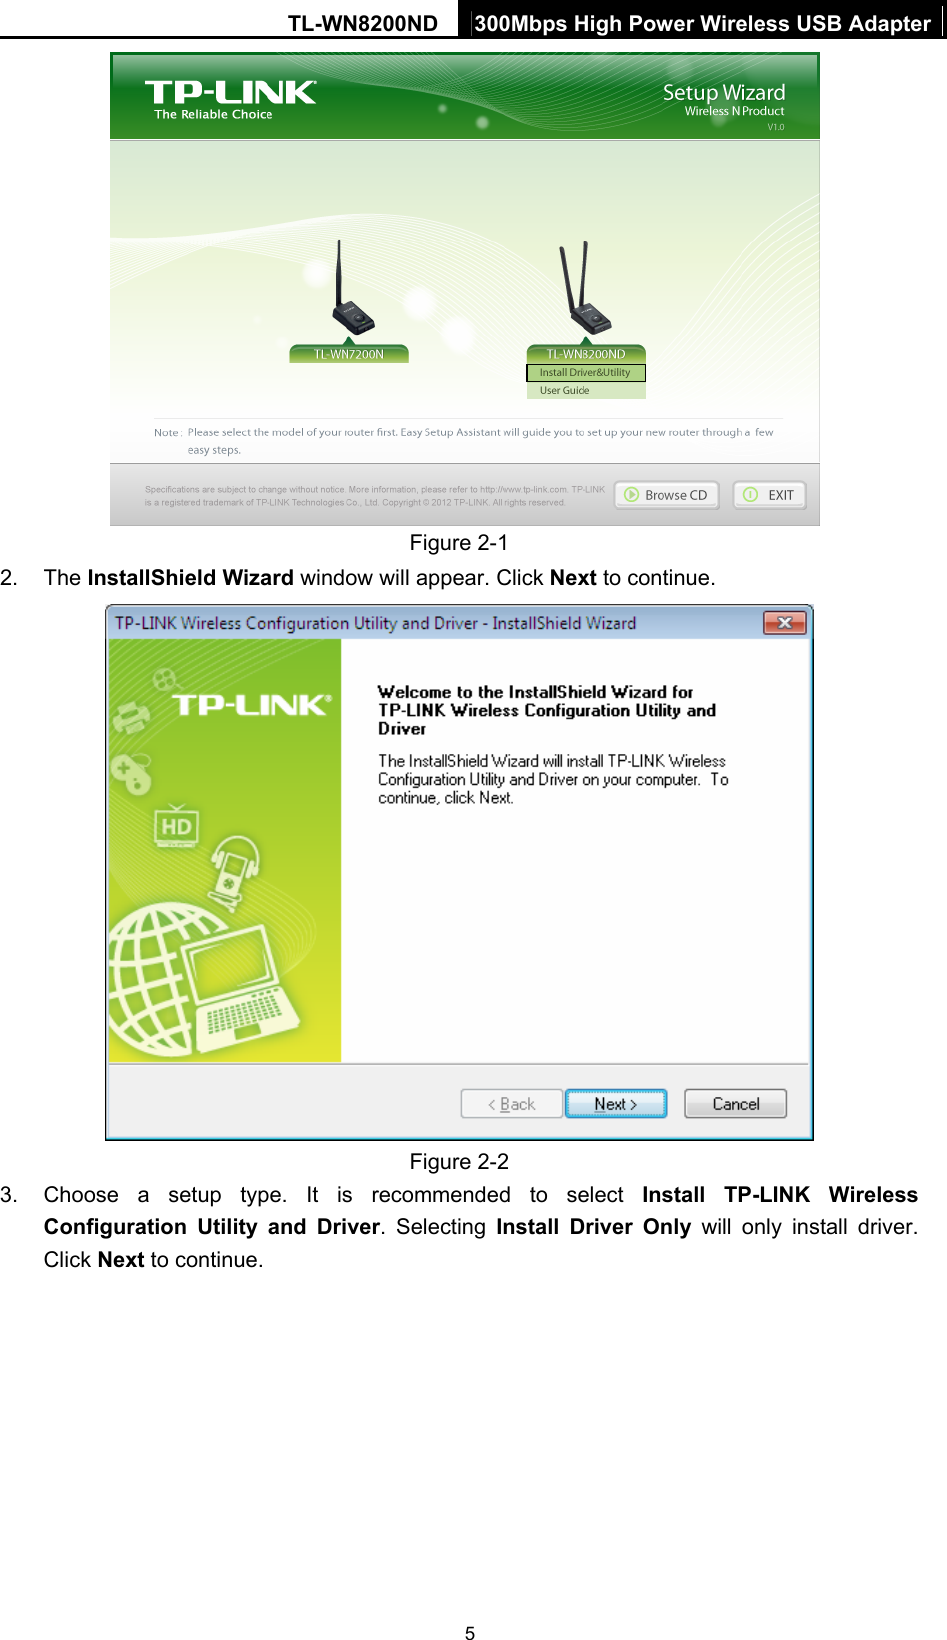 TL-WN8200ND  300Mbps High Power Wireless USB Adapter  5   Figure 2-1 2. The InstallShield Wizard window will appear. Click Next to continue.  Figure 2-2 3.  Choose a setup type. It is recommended to select Install TP-LINK Wireless Configuration Utility and Driver. Selecting Install Driver Only will only install driver. Click Next to continue. 